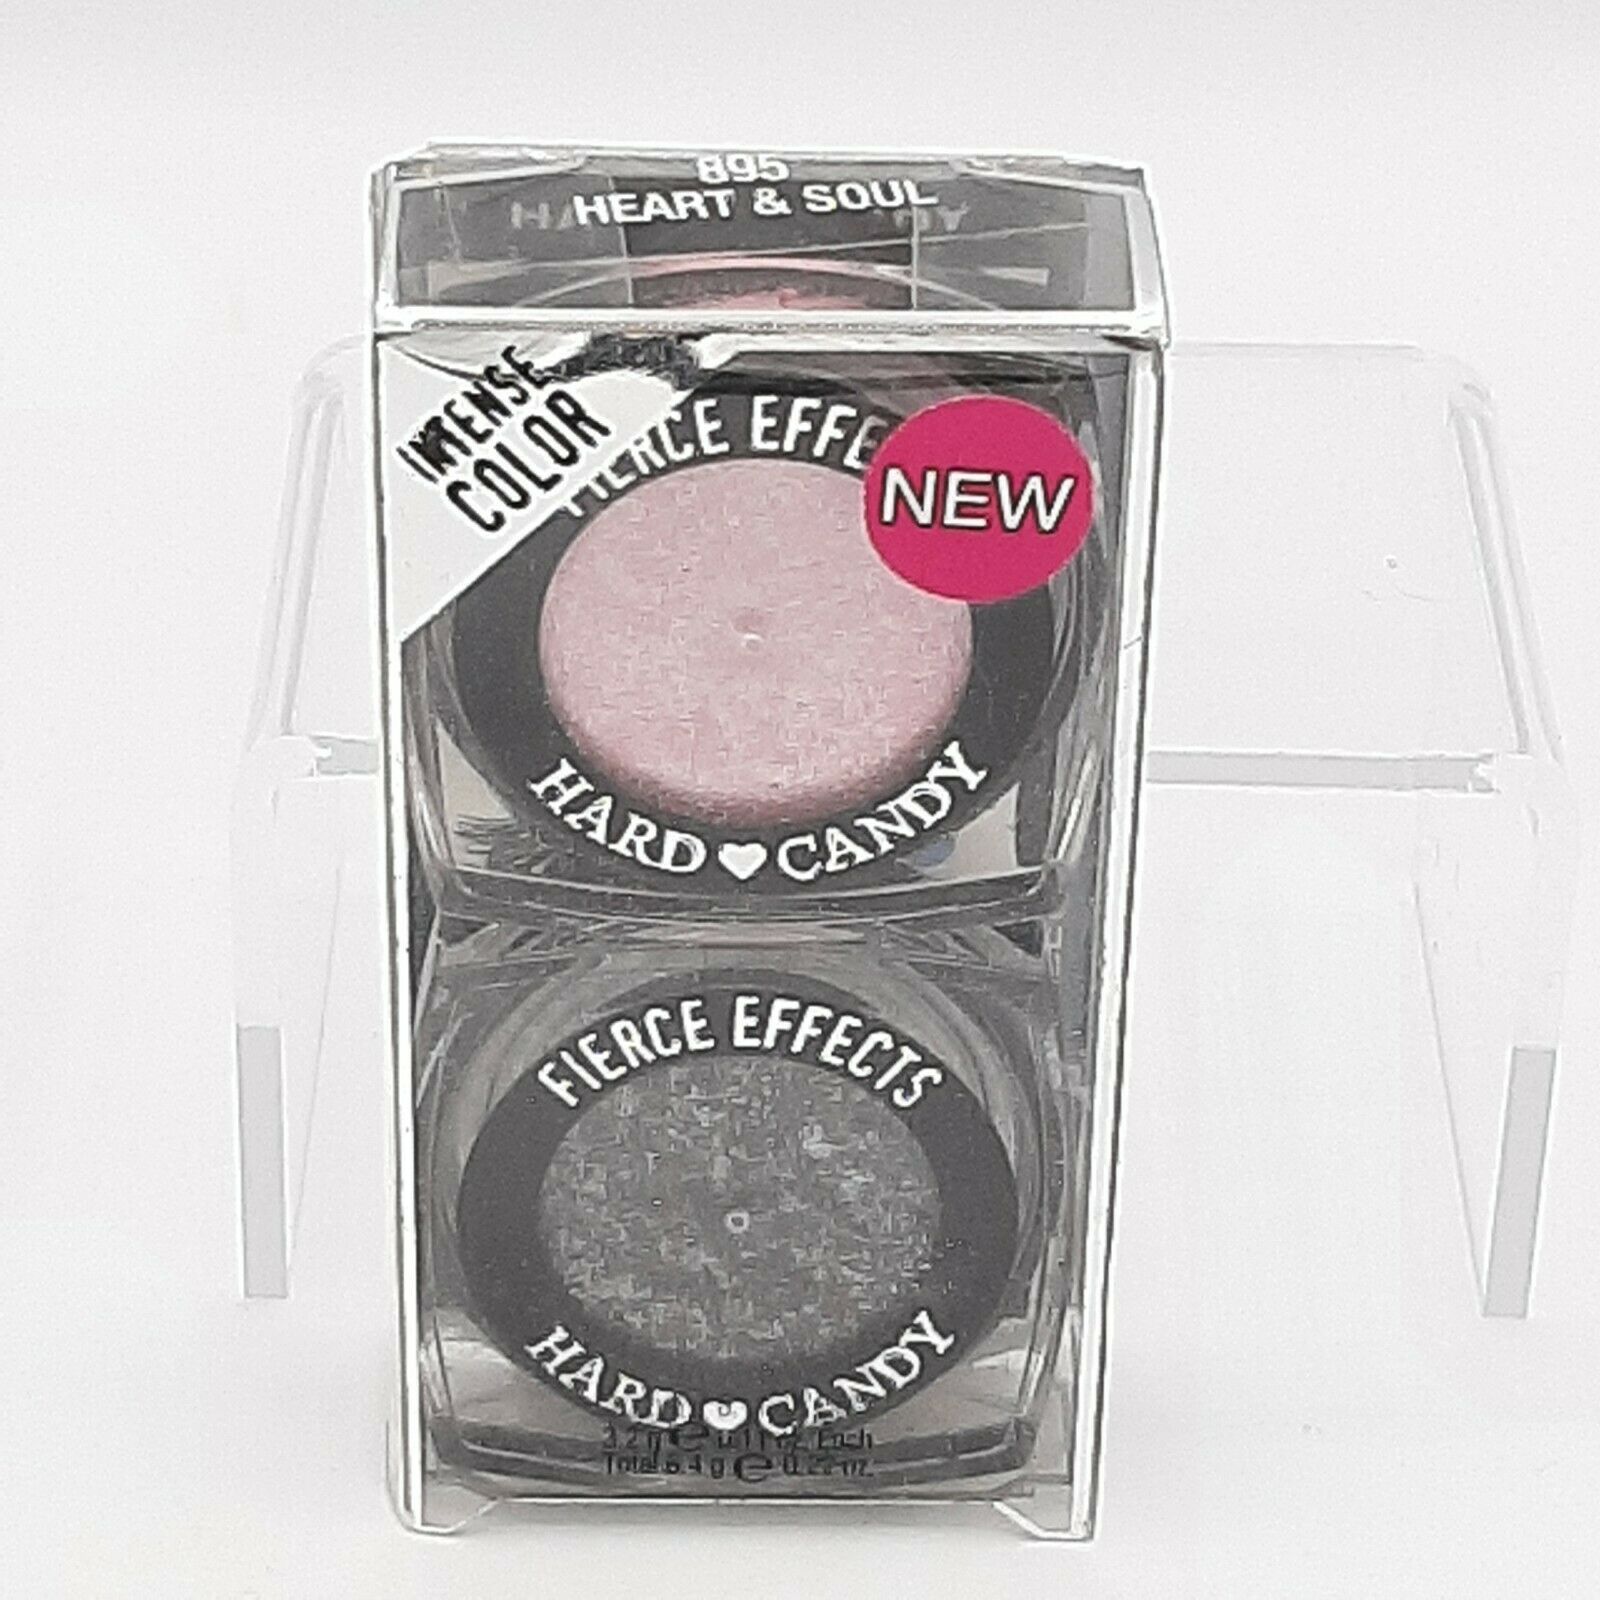 Primary image for Hard Candy Fierce Effects Shadow Duo Eyeshadow, 894 Heart & Soul